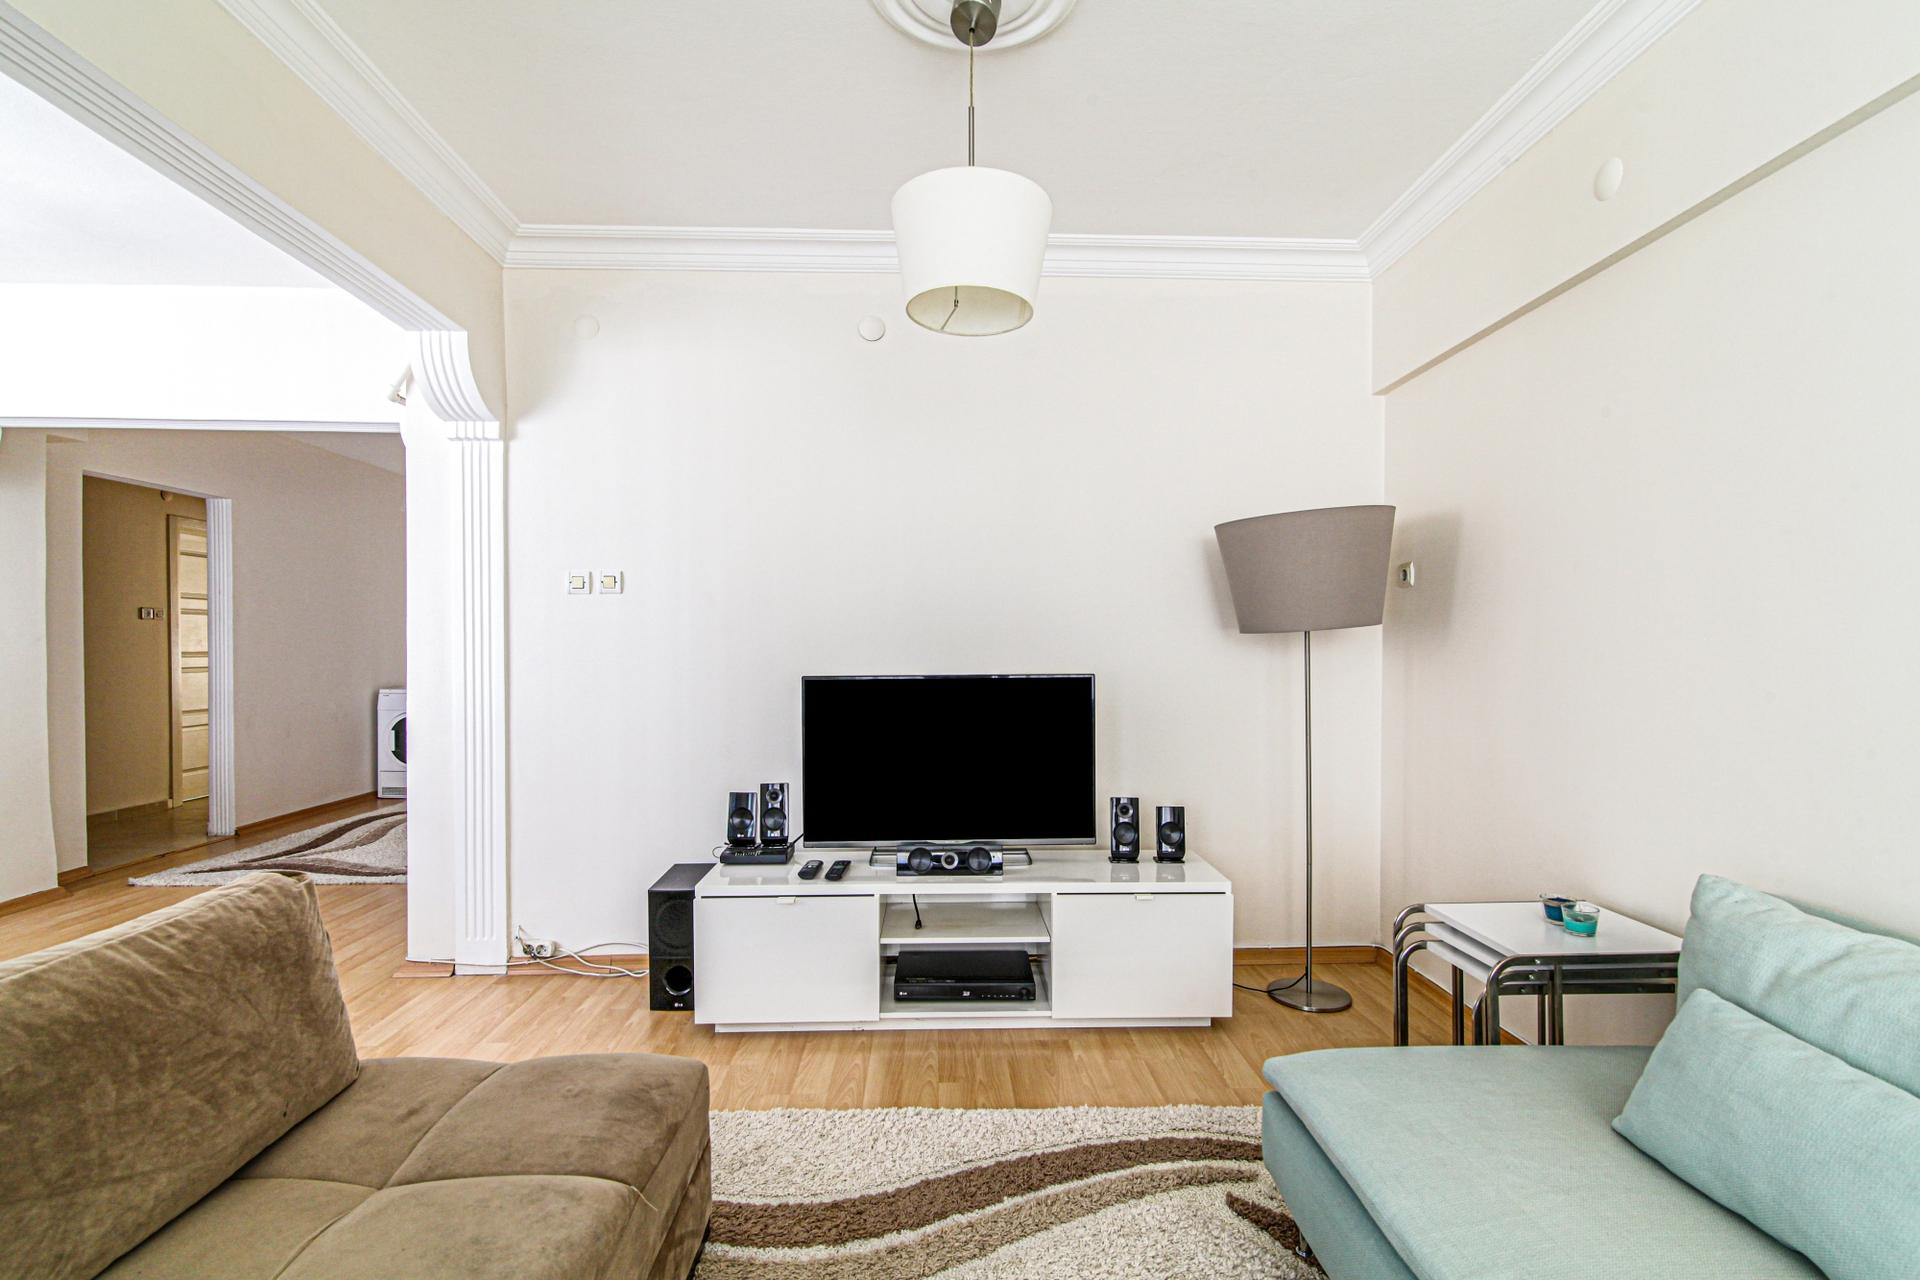 We invite you to experience a delightful vacation in our flat in Istanbul's beautiful city.